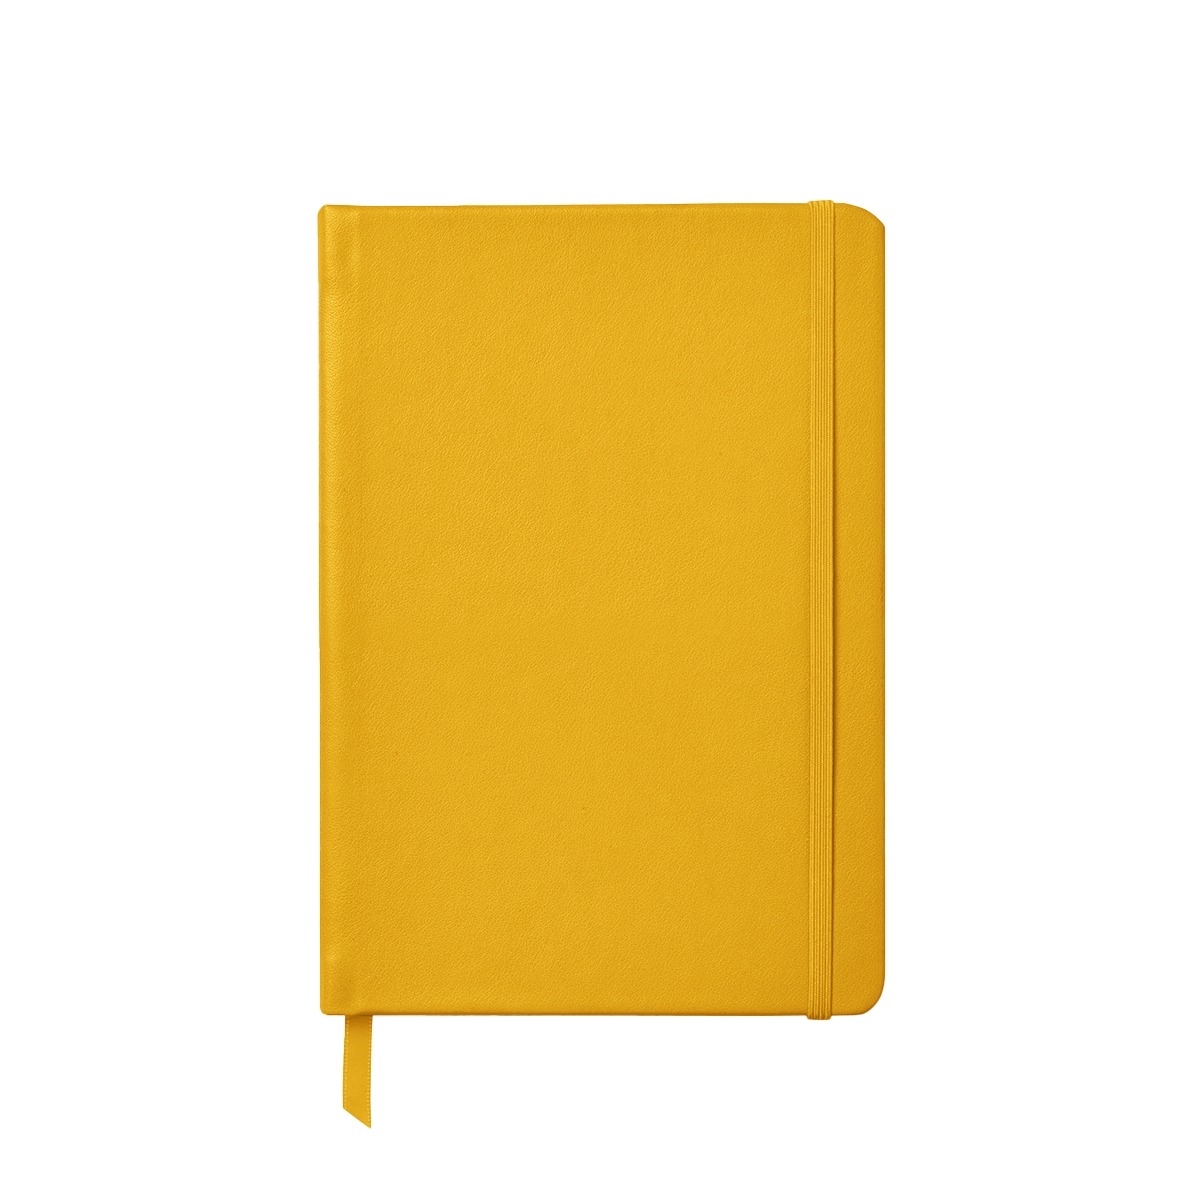 NAB_PF_concept_Soft_notebook_Yellow_W.png